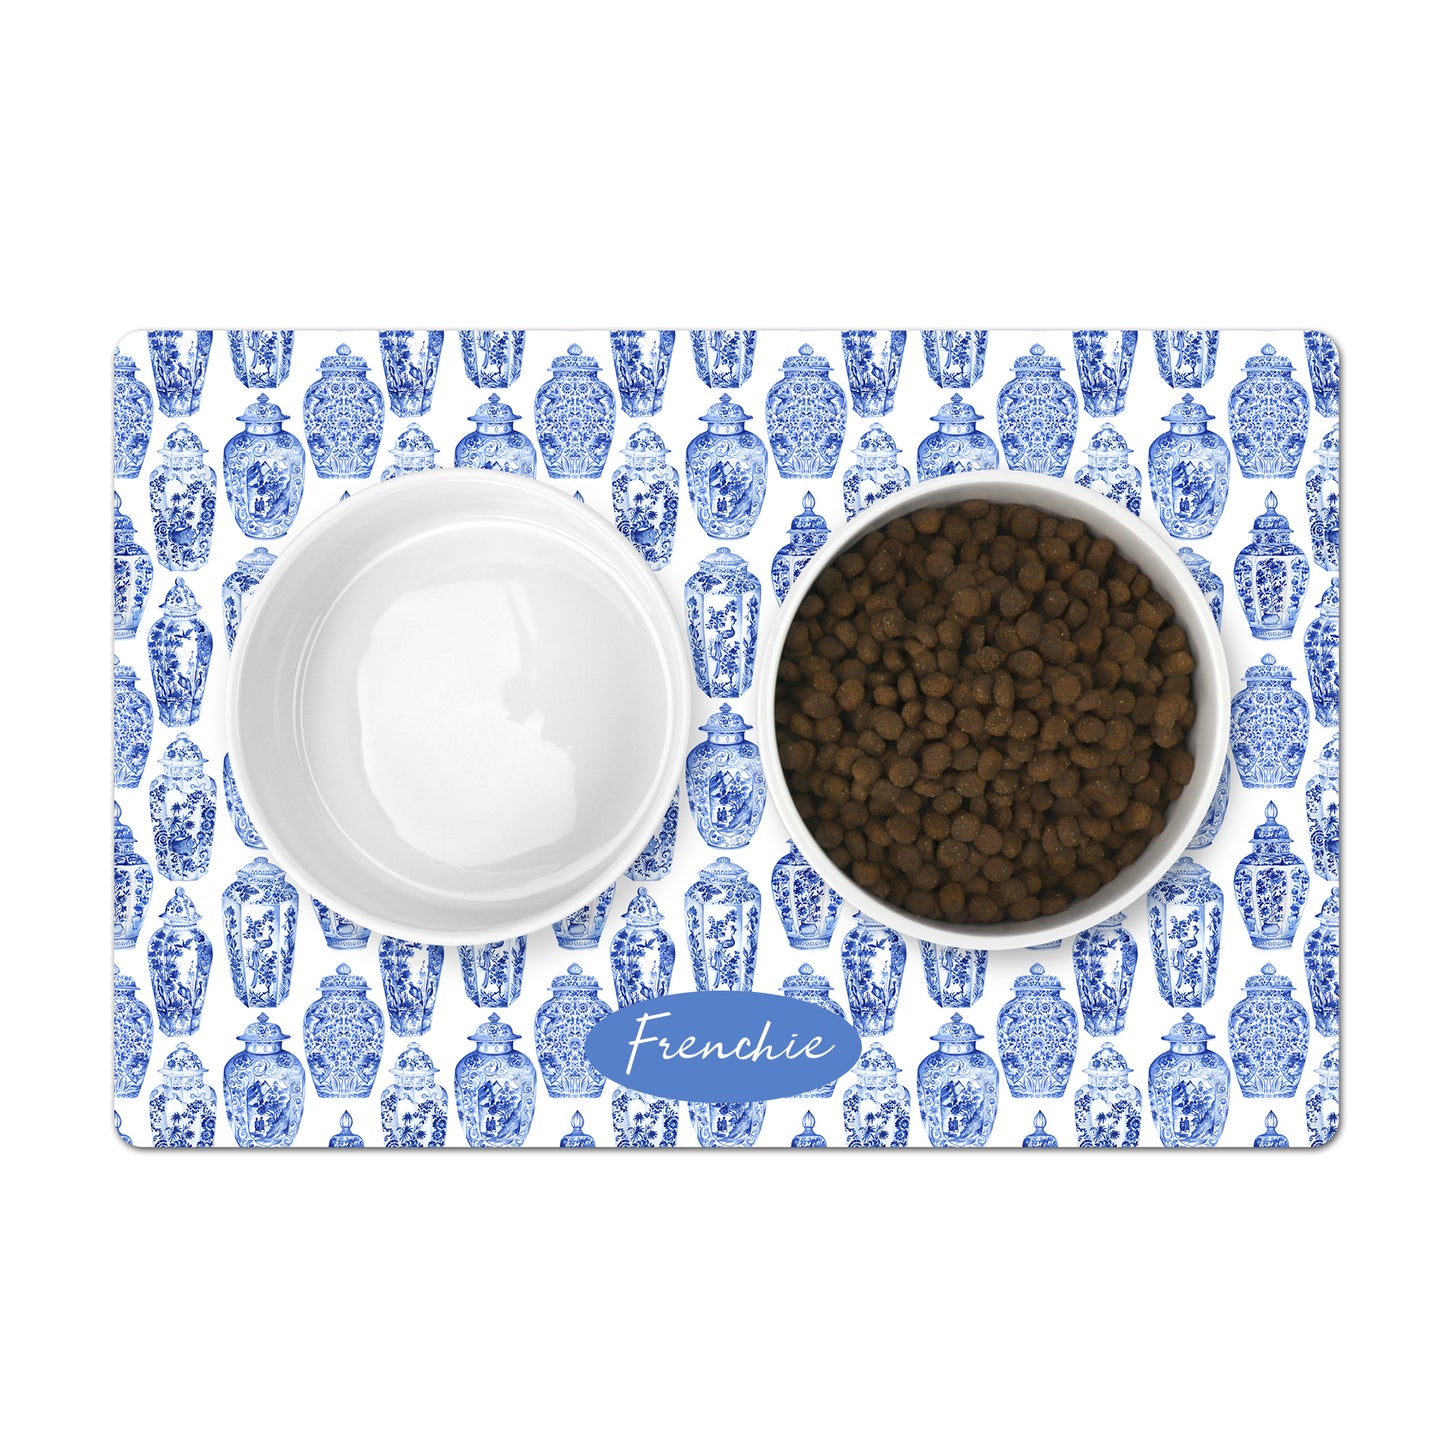 Personalized Dog Mat or Cat Mat for food and water bowls with blue and white ginger jars pattern.